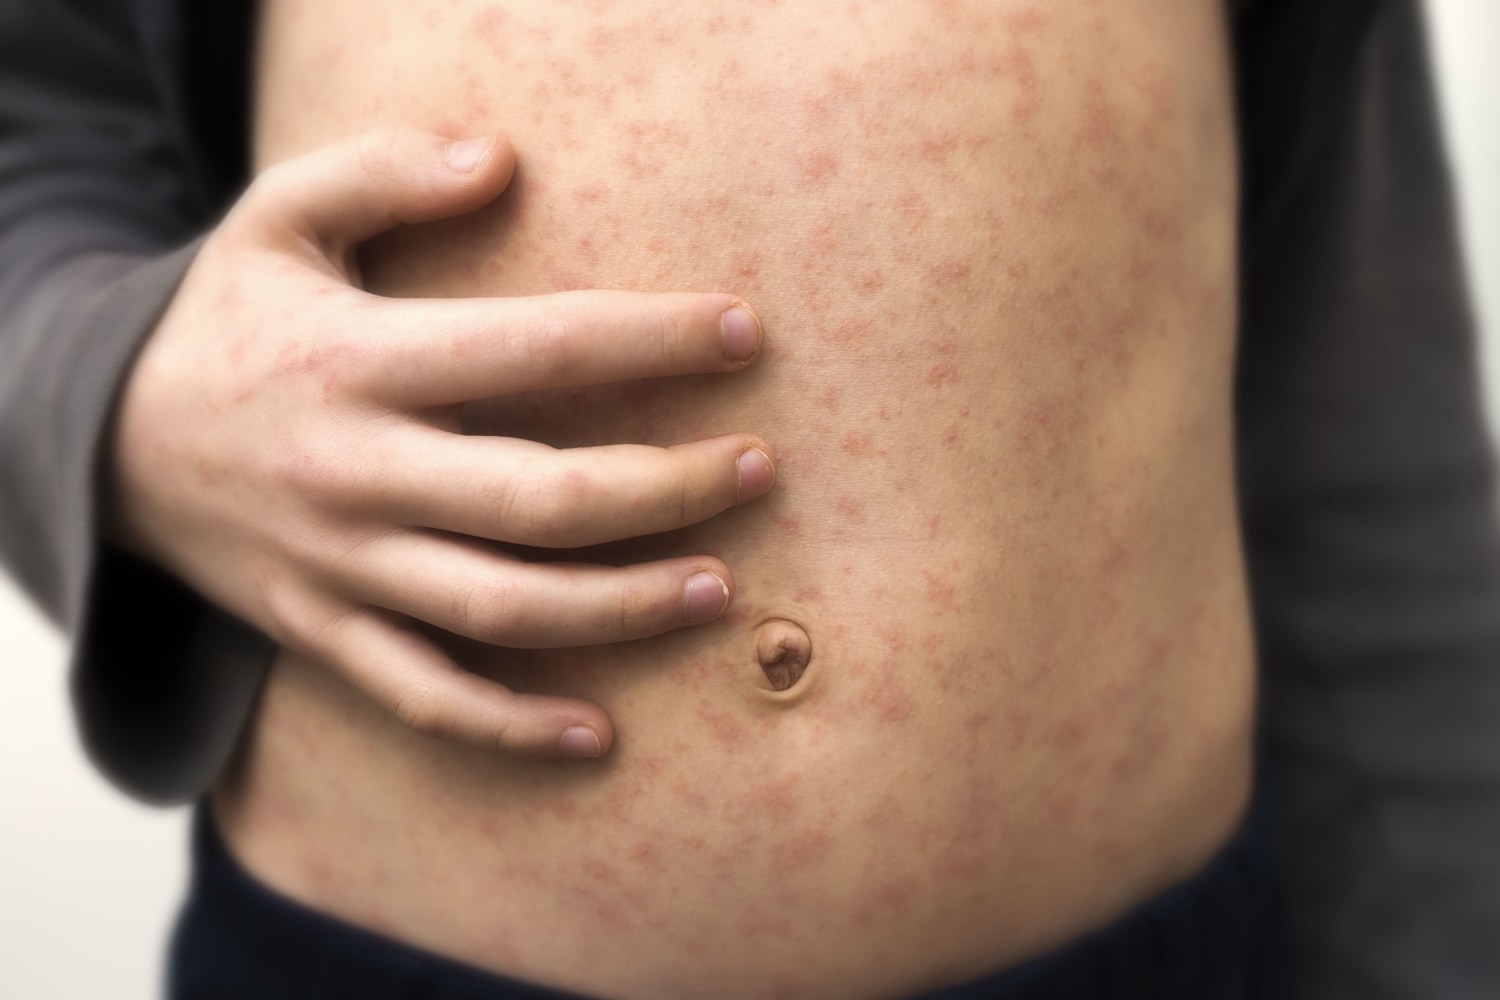 This skin rash is back after almost vanishing during the pandemic - The  Washington Post